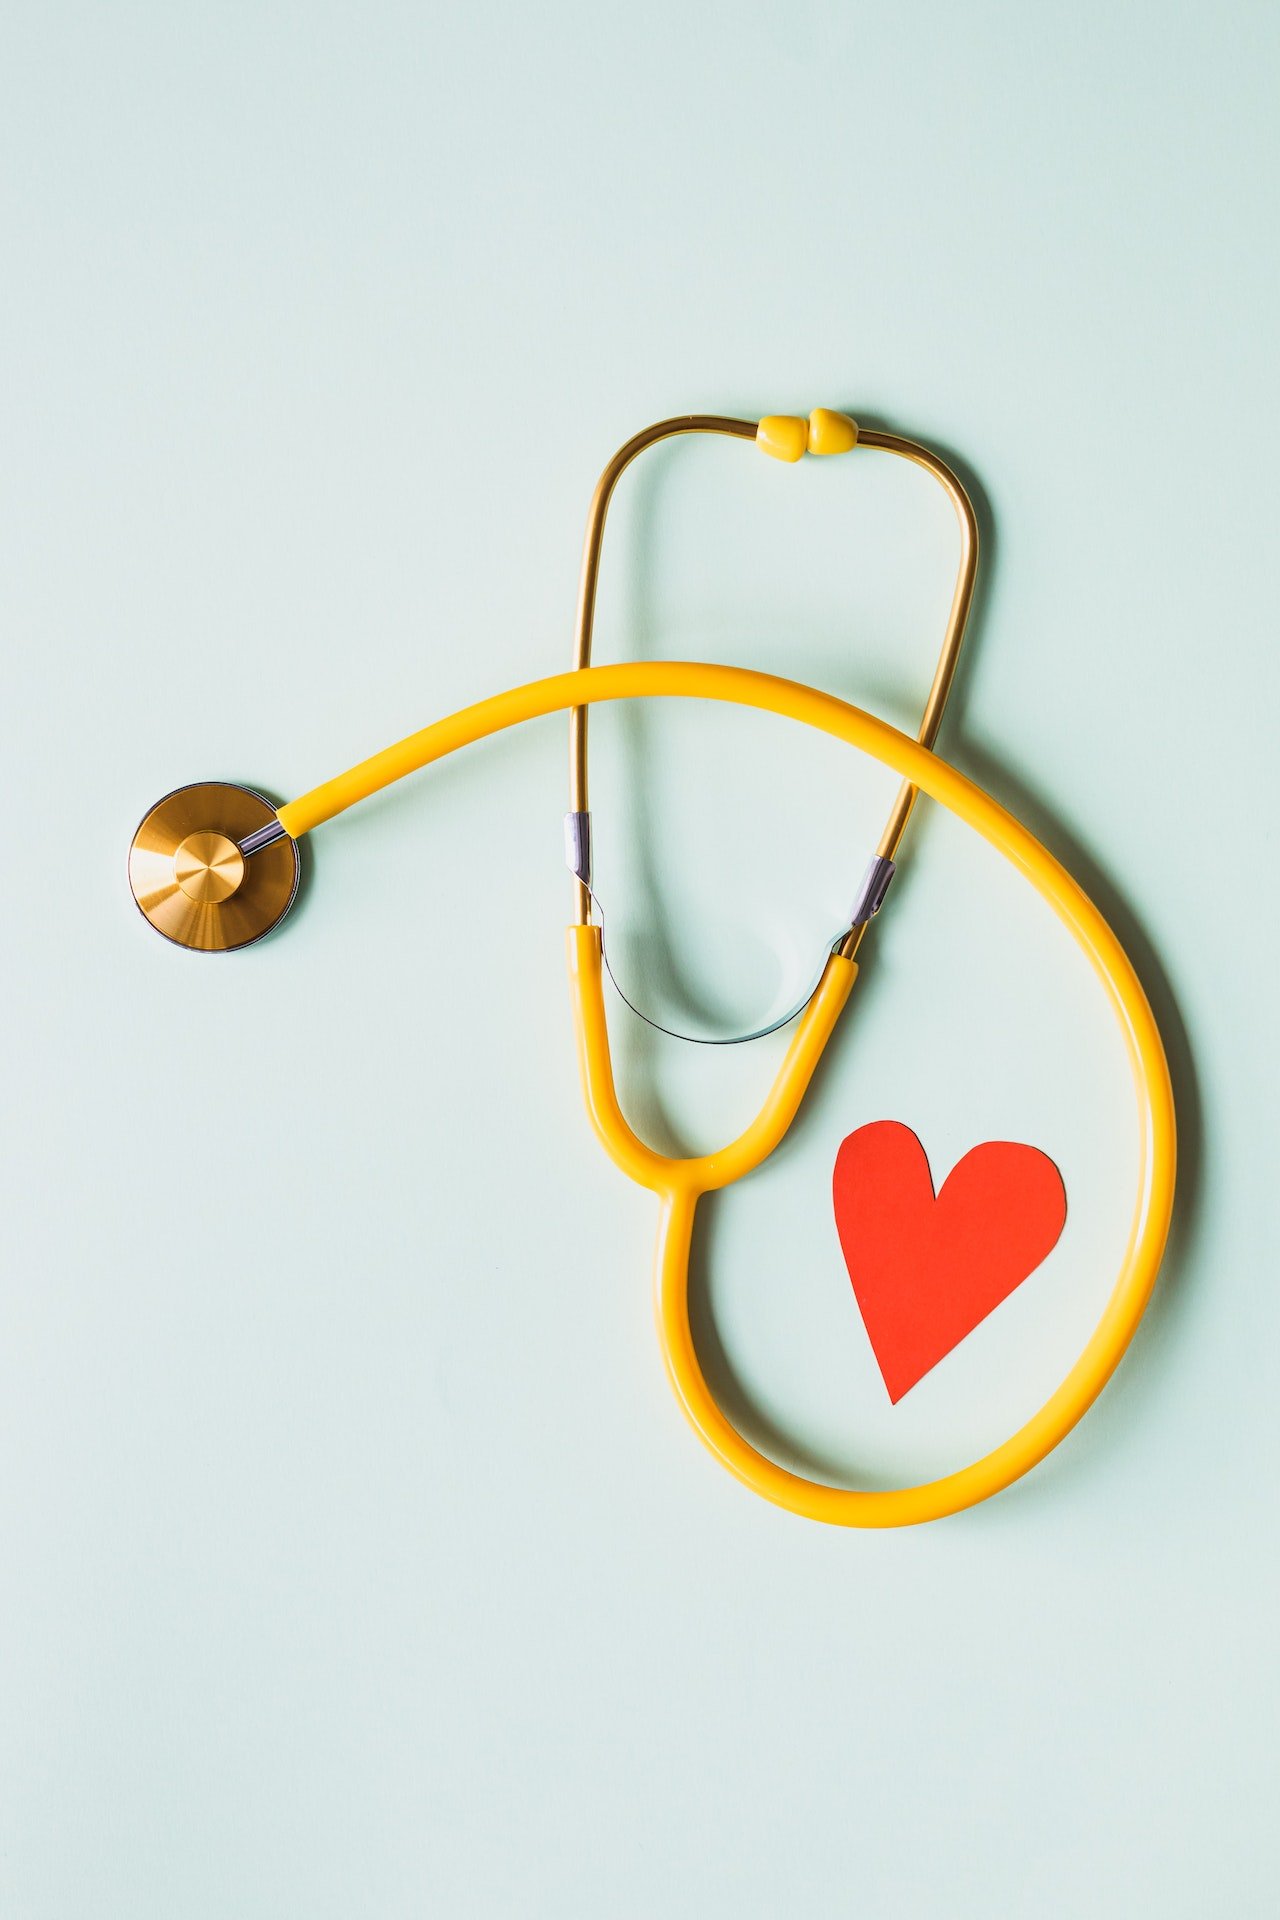 5 Ways to Lower Your Medical Expenses